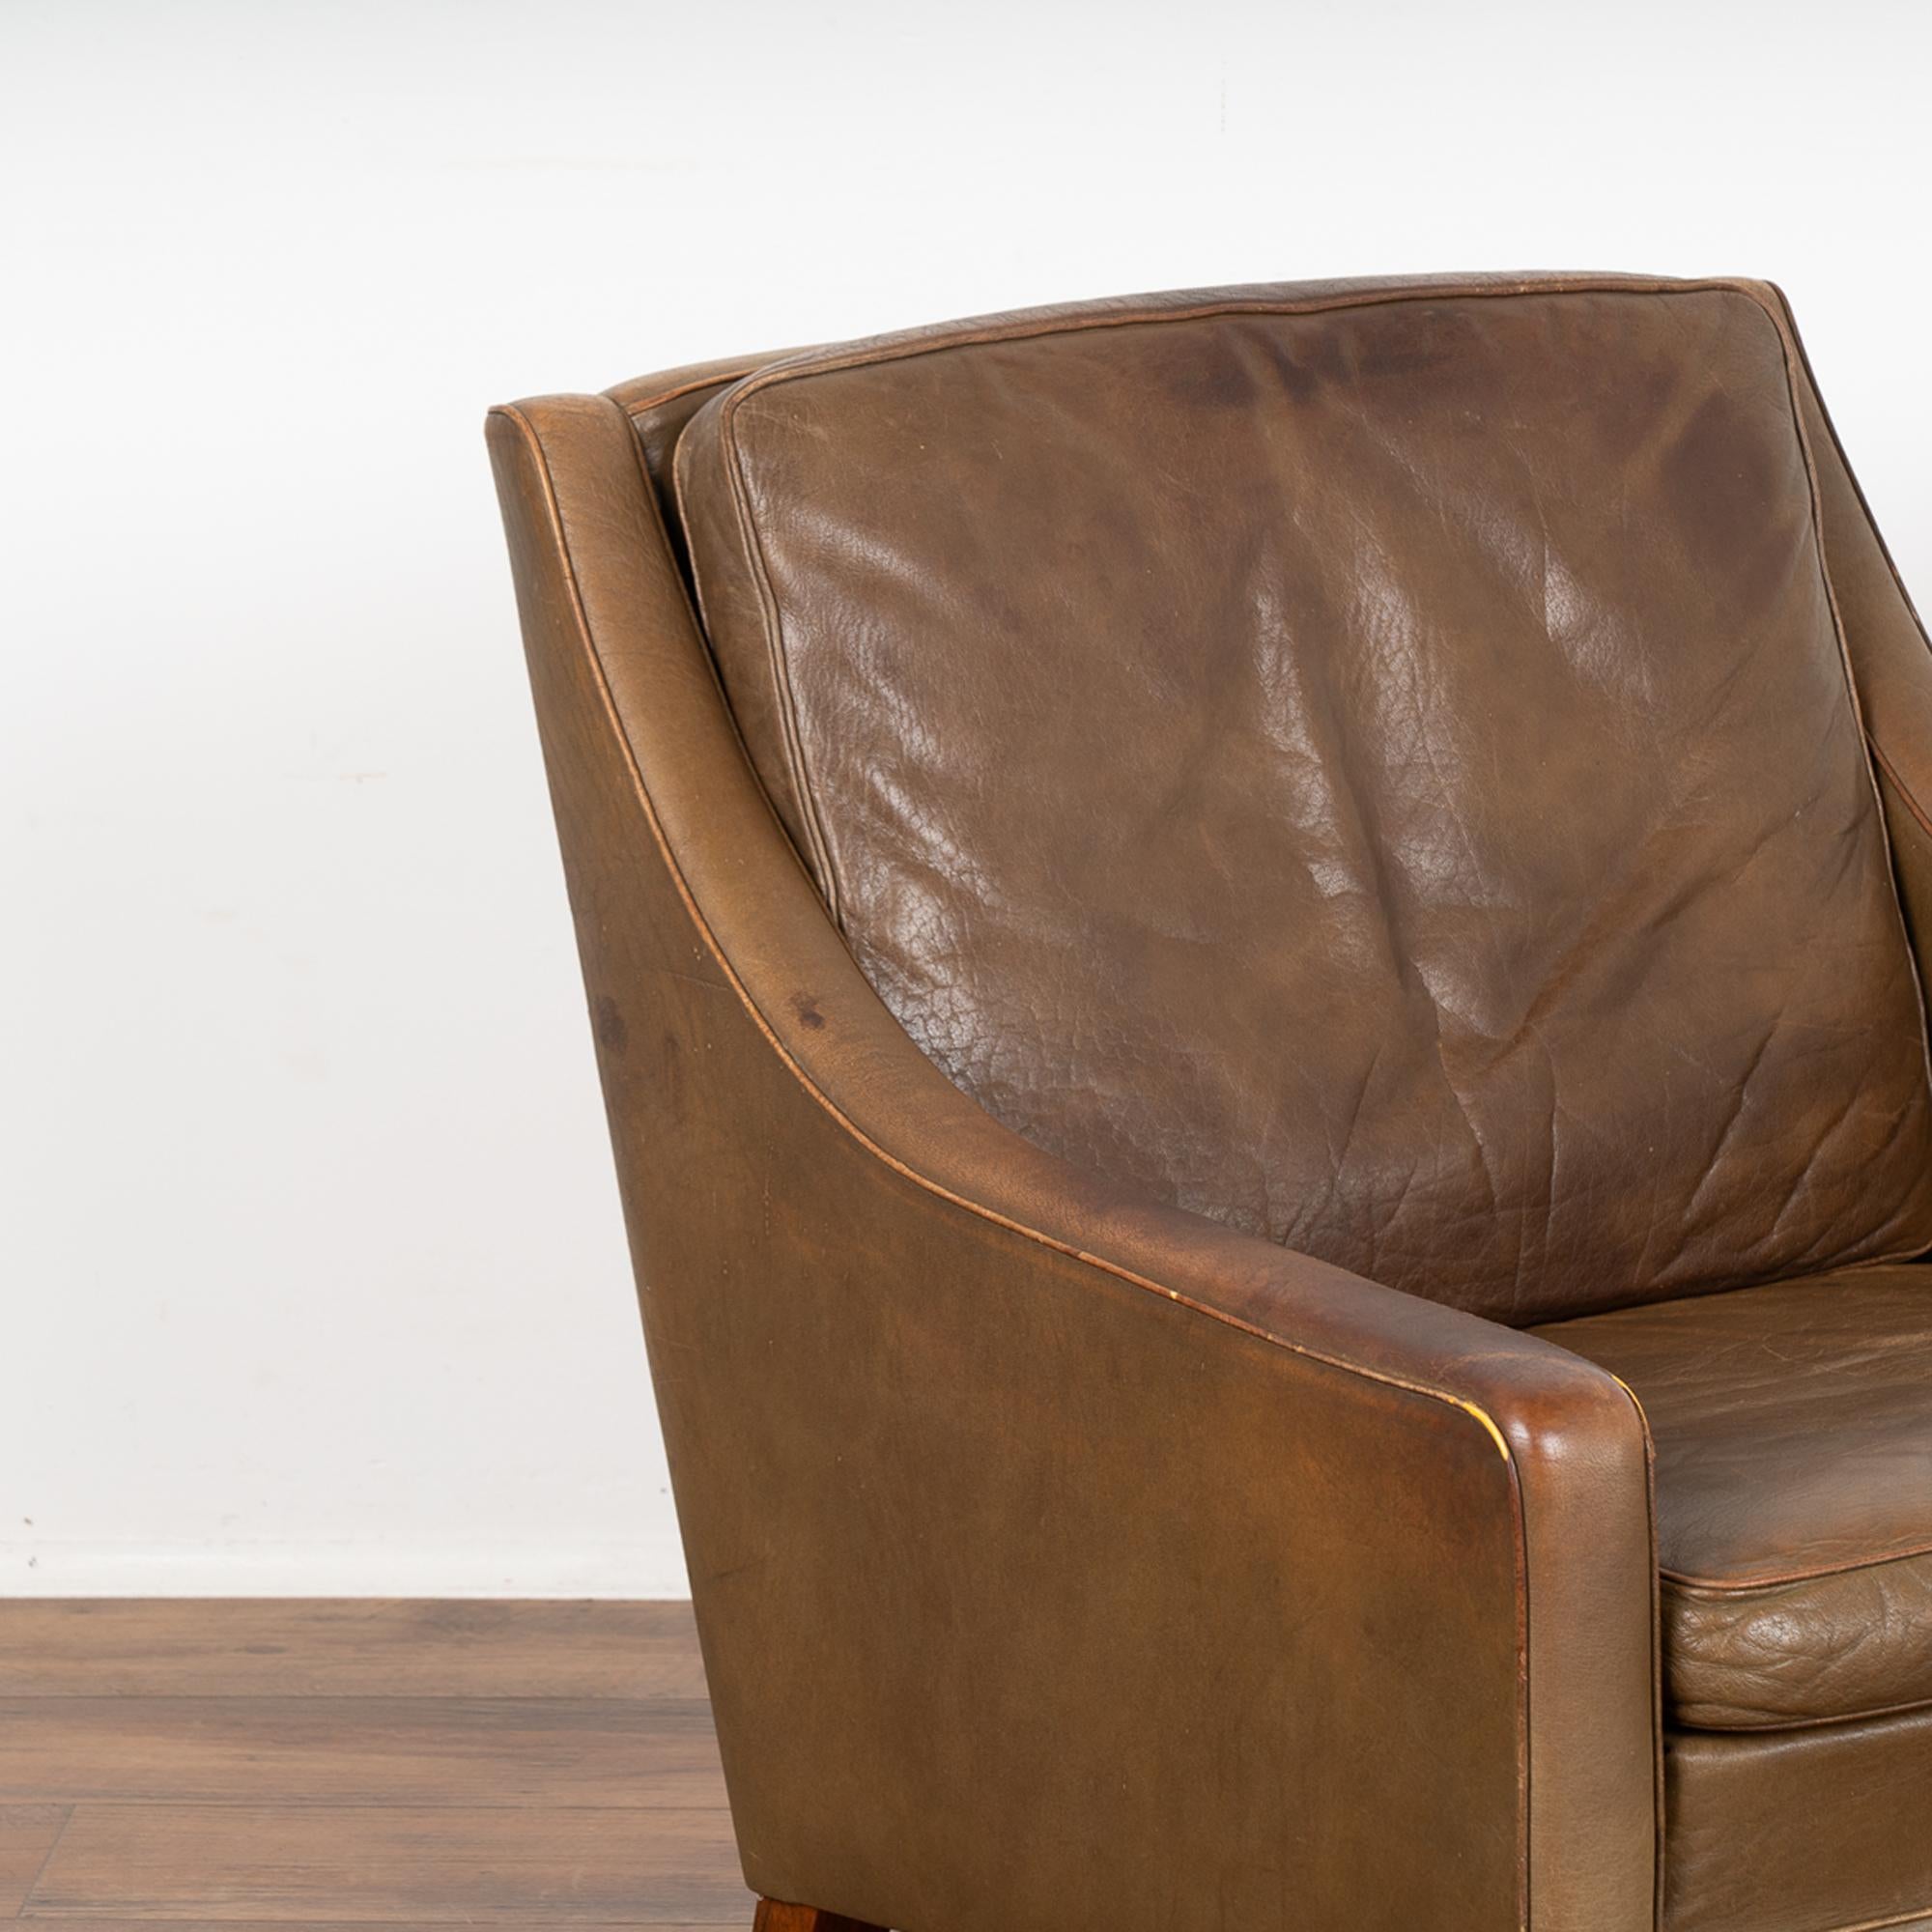 20th Century Mid Century Brown Vintage Leather Arm Chair, Denmark circa 1960-70 For Sale